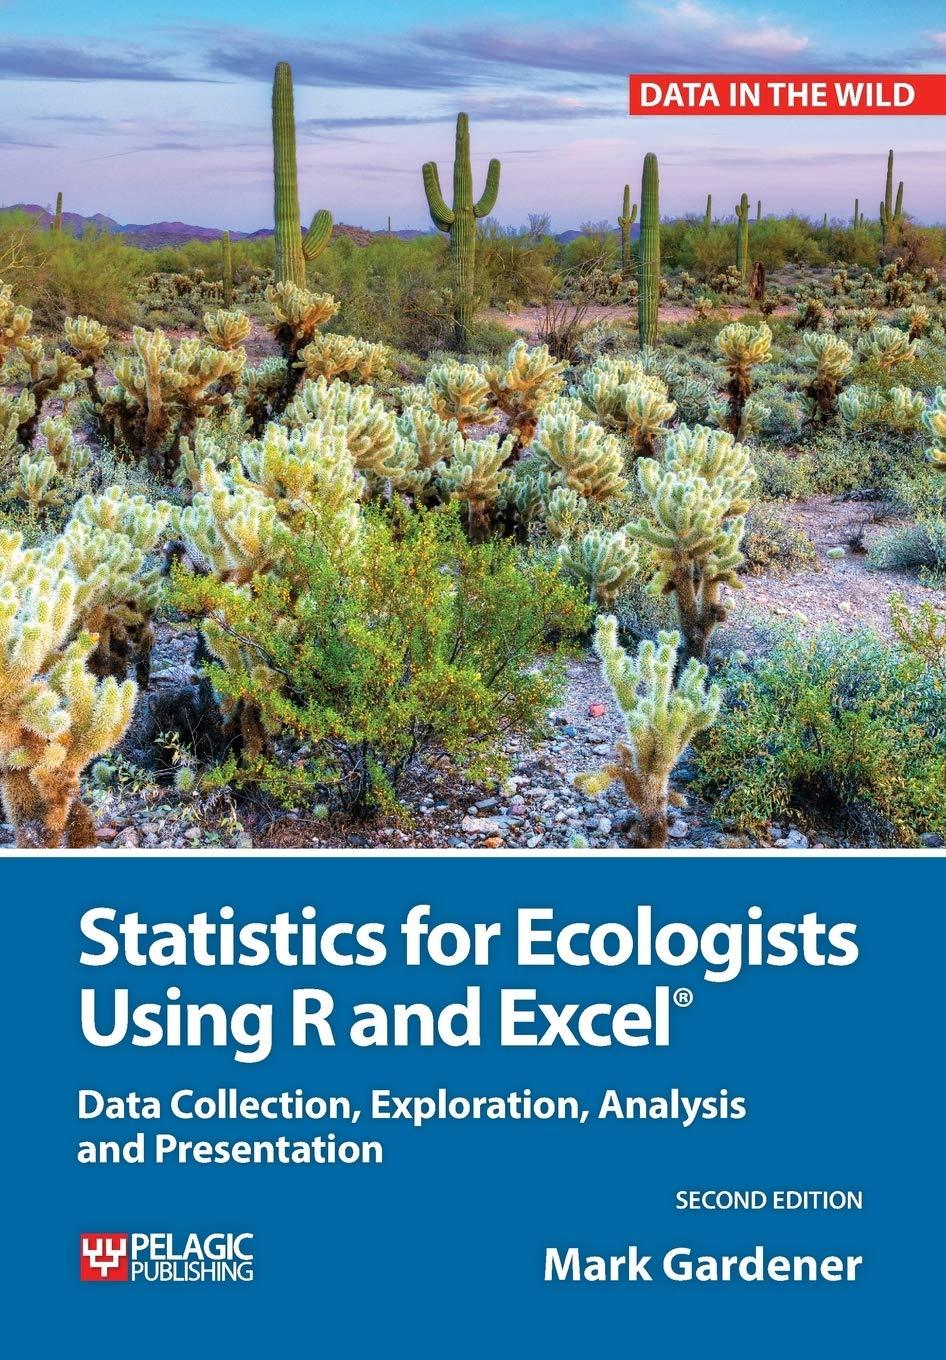 statistics for ecologists using r and excel 2nd edition mark gardener 178427139x, 9781784271398